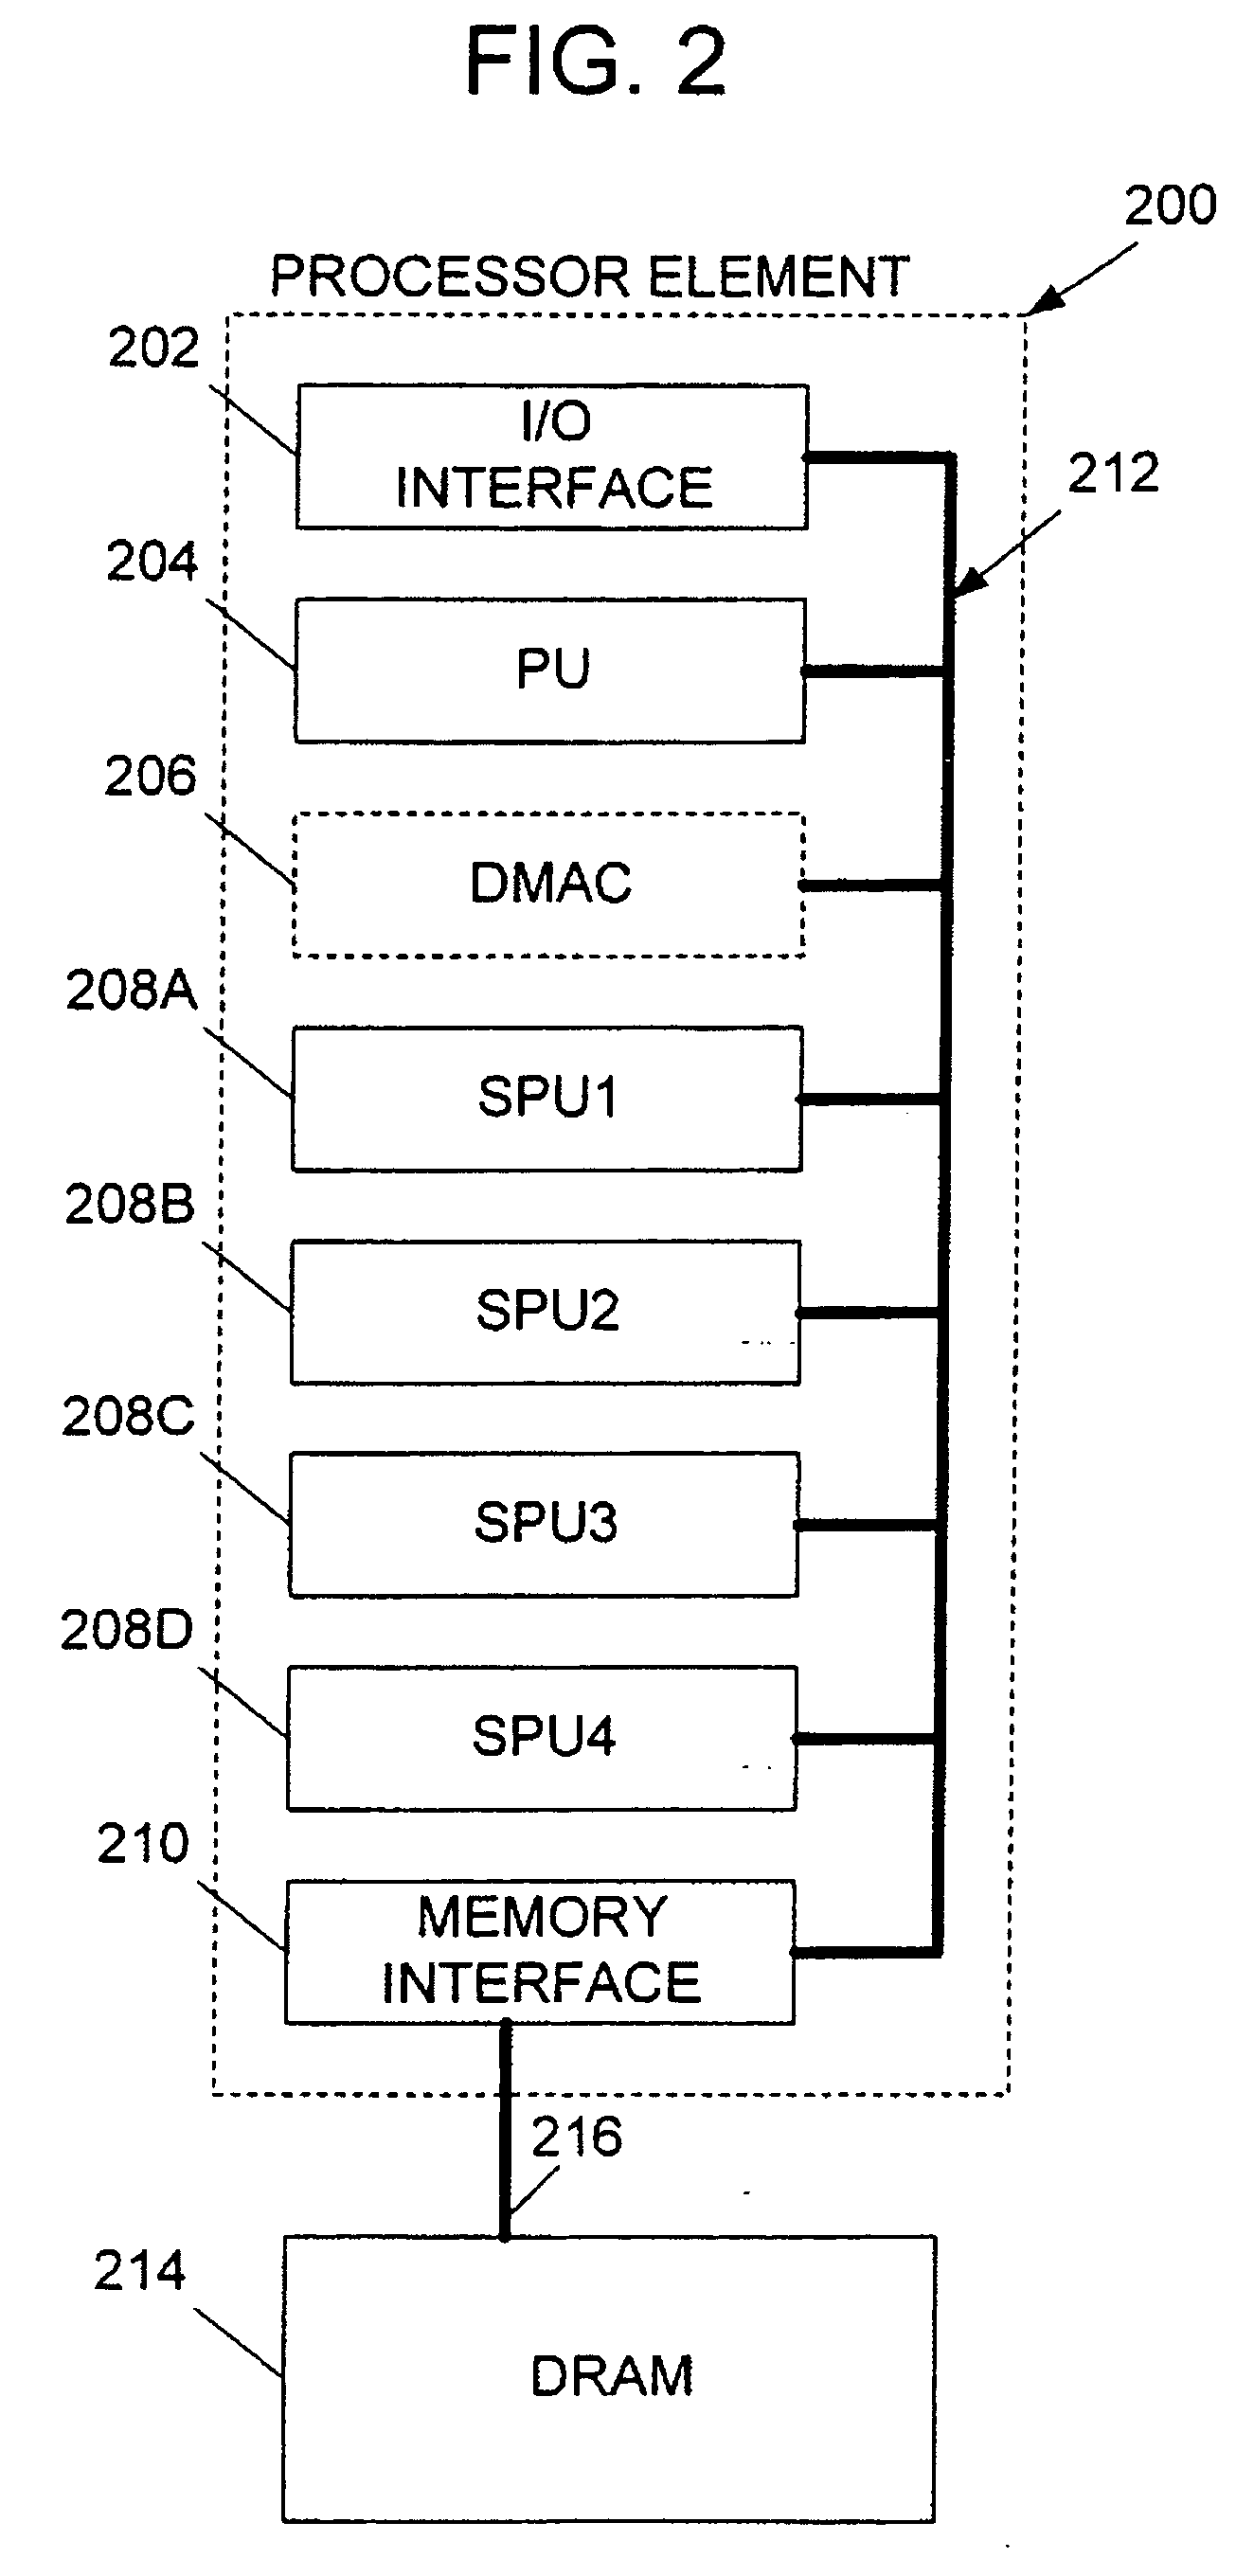 Methods and apparatus for handling processing errors in a multi-processing system